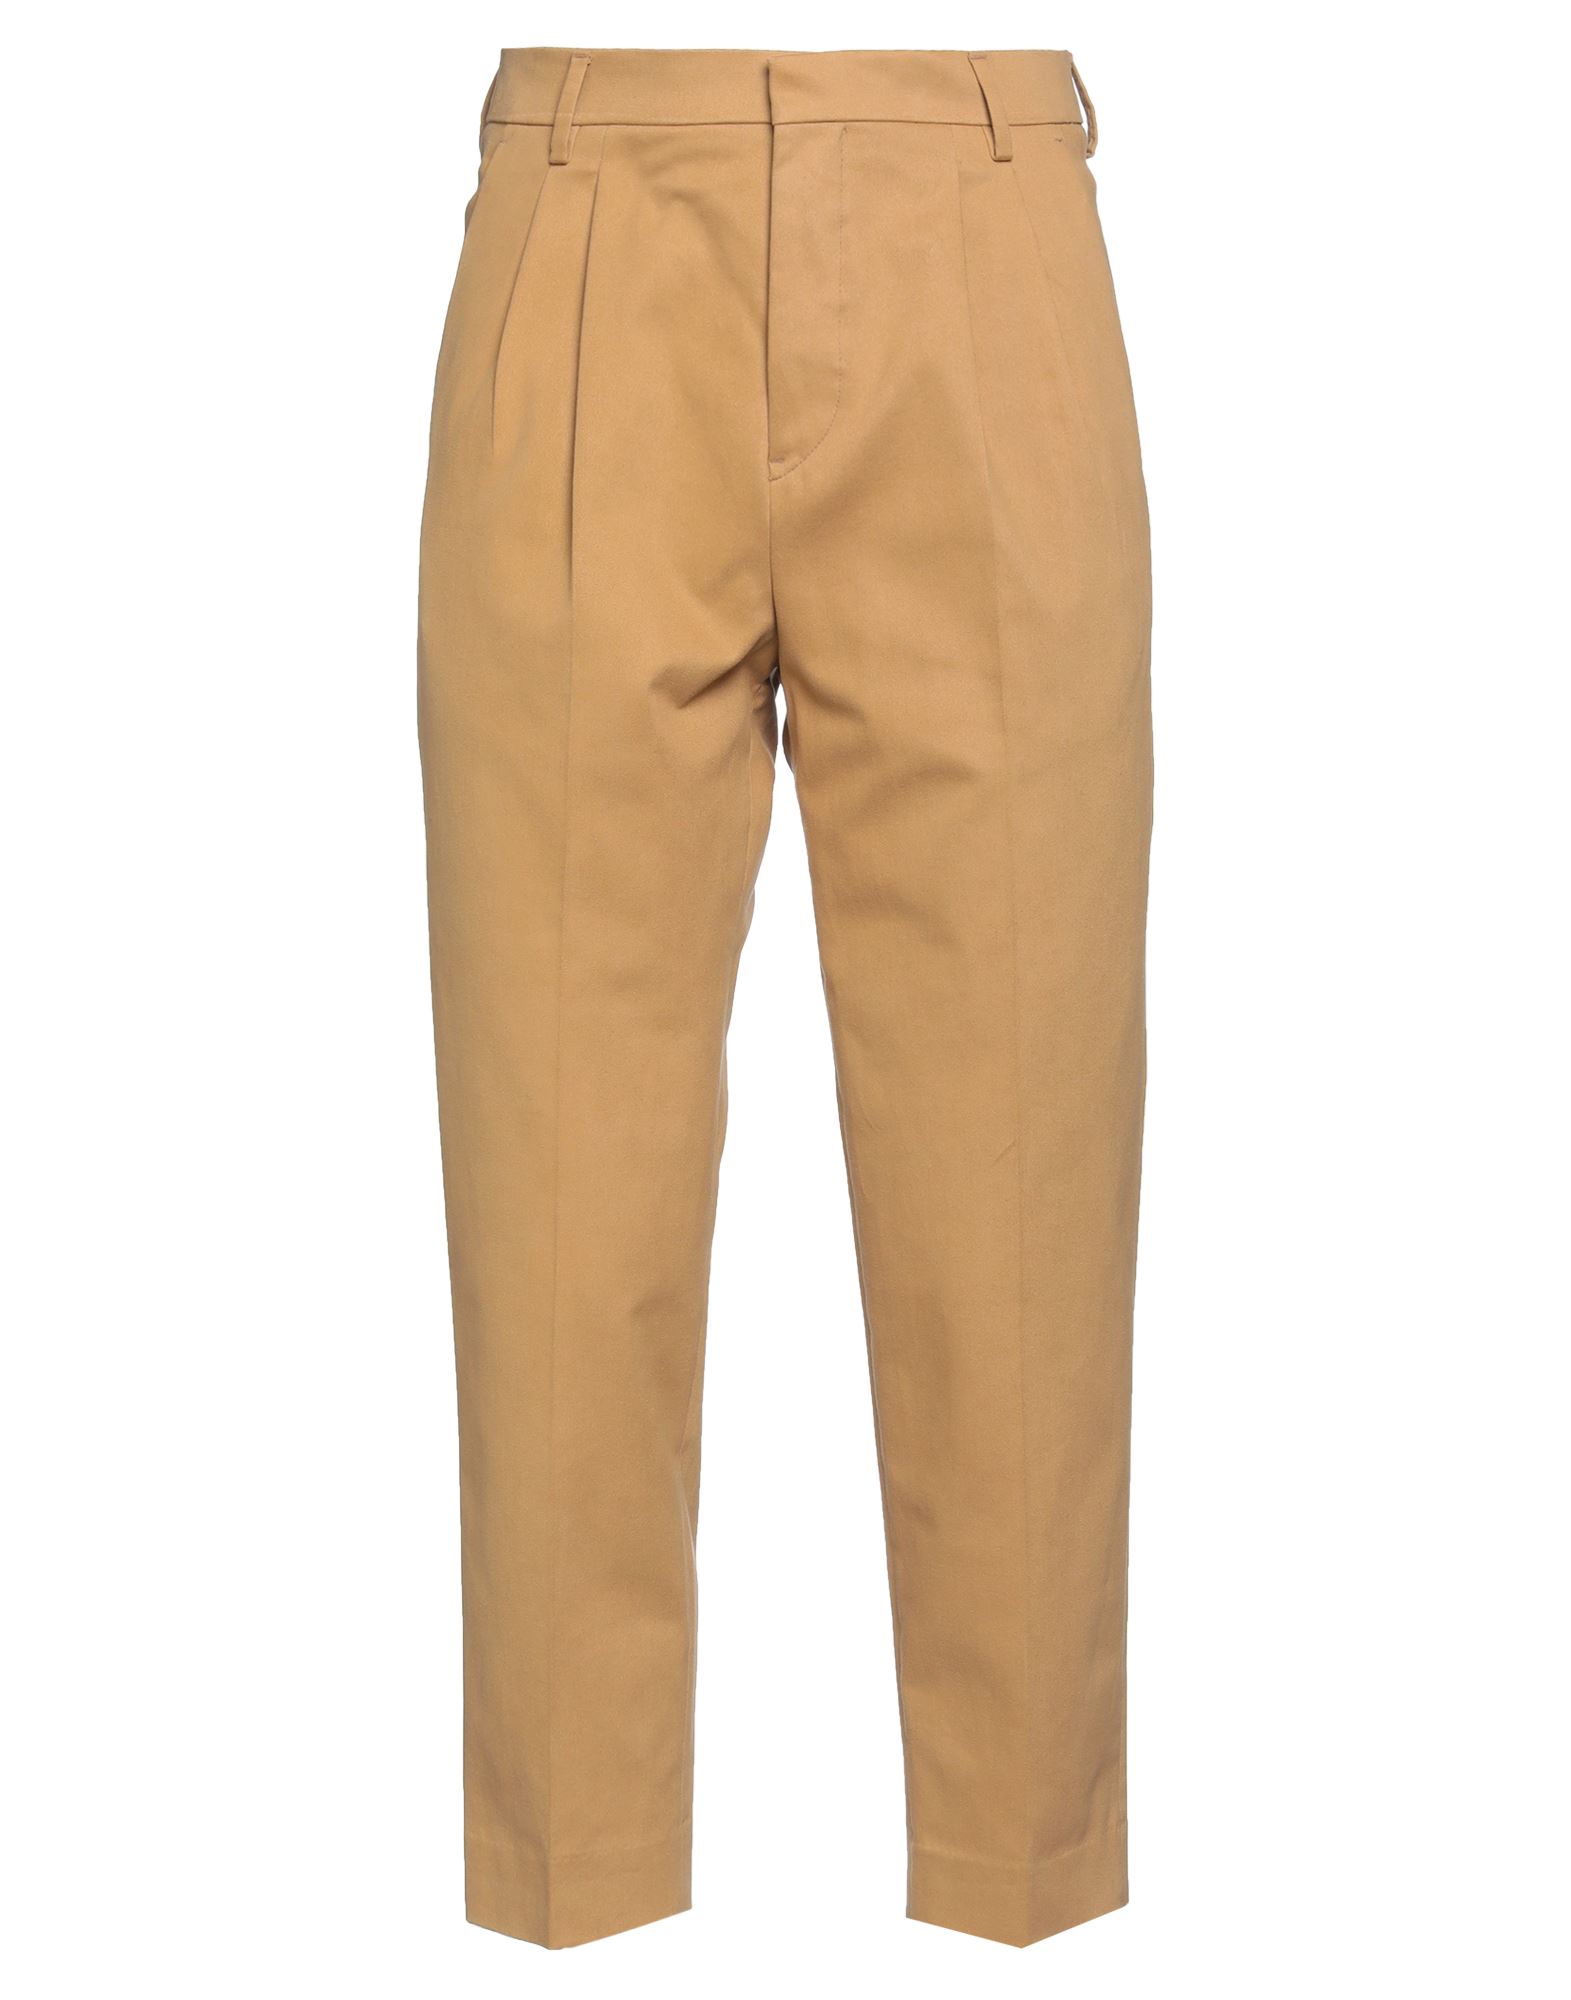 Mauro Grifoni Pants In Camel